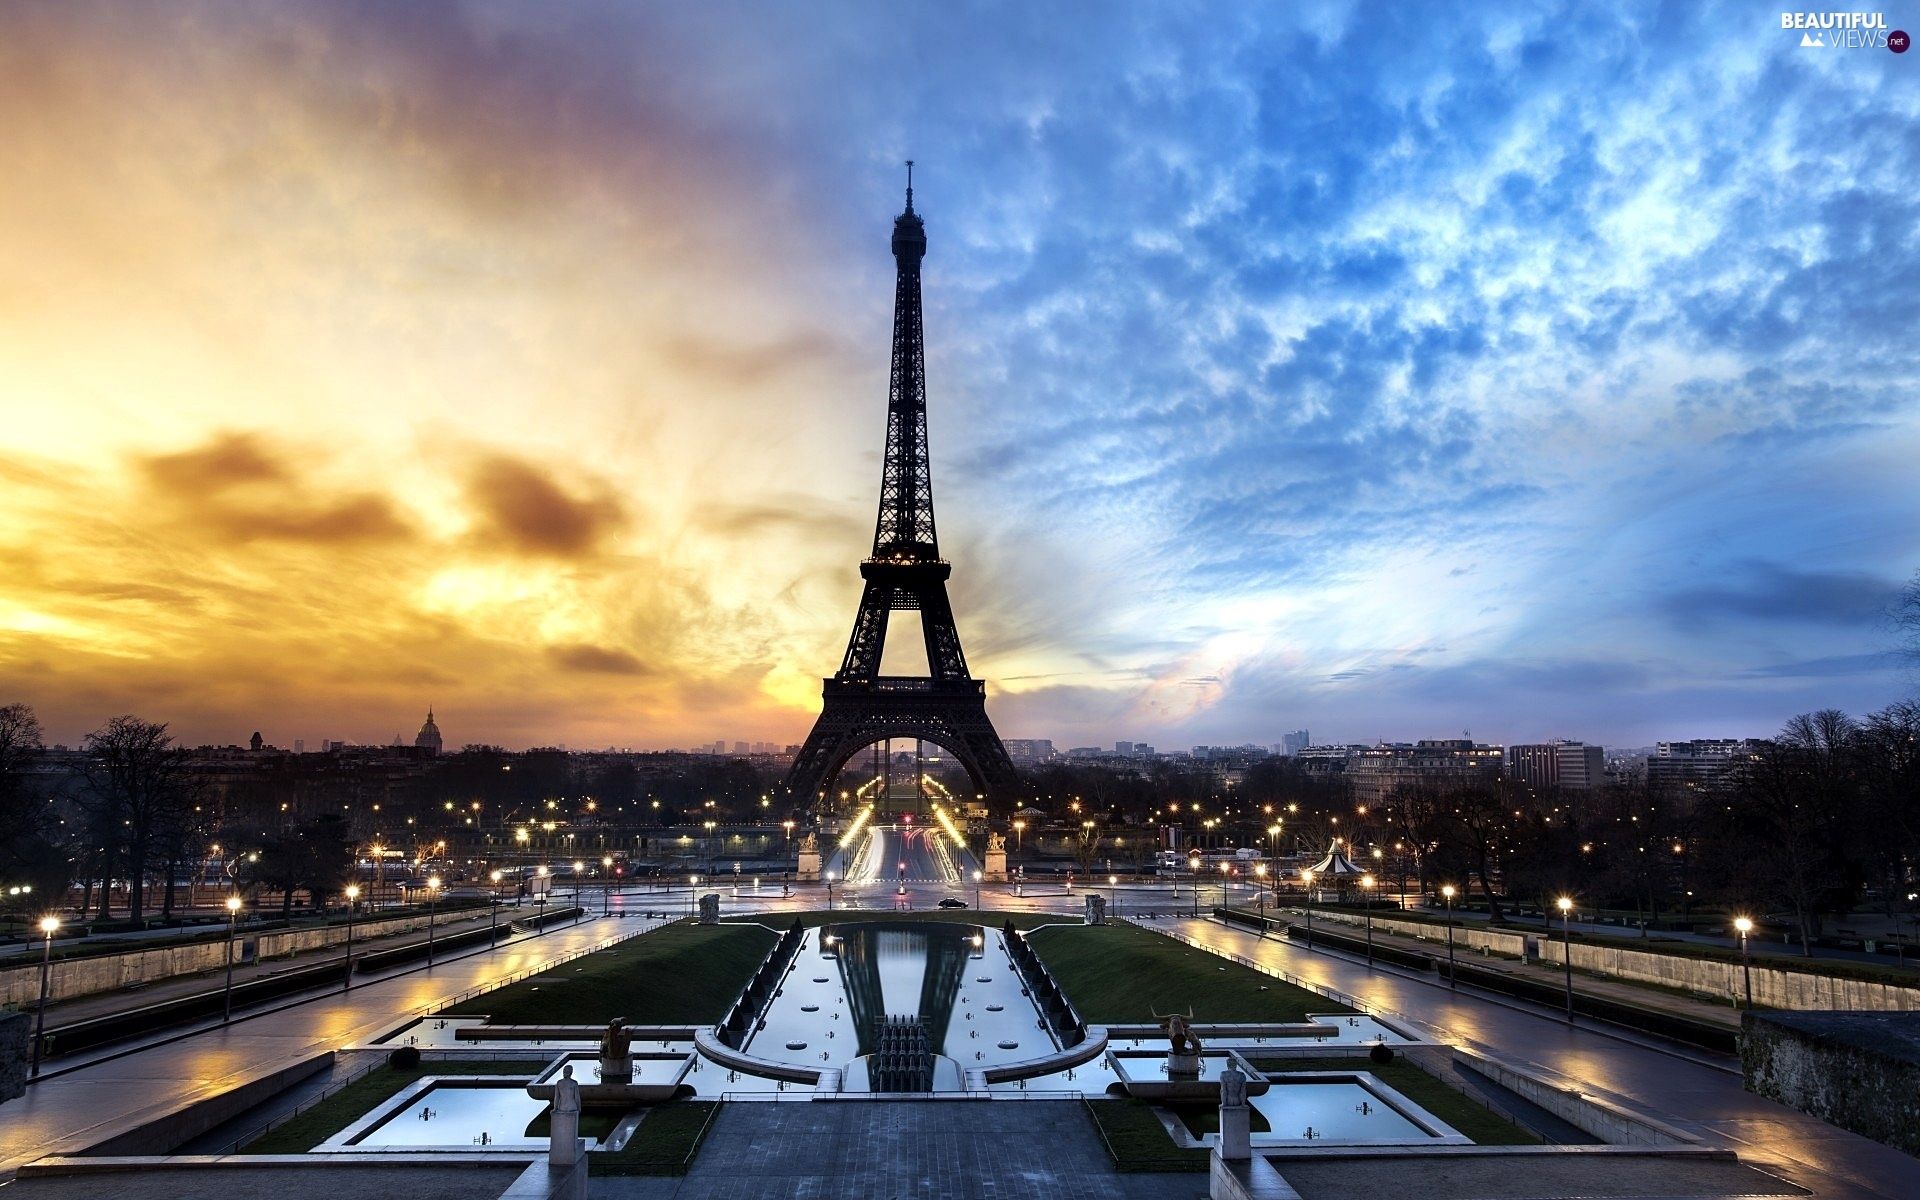 Great Sunsets, France, Eiffla Tower, Champs Elysees, Paris views wallpaper: 1920x1200